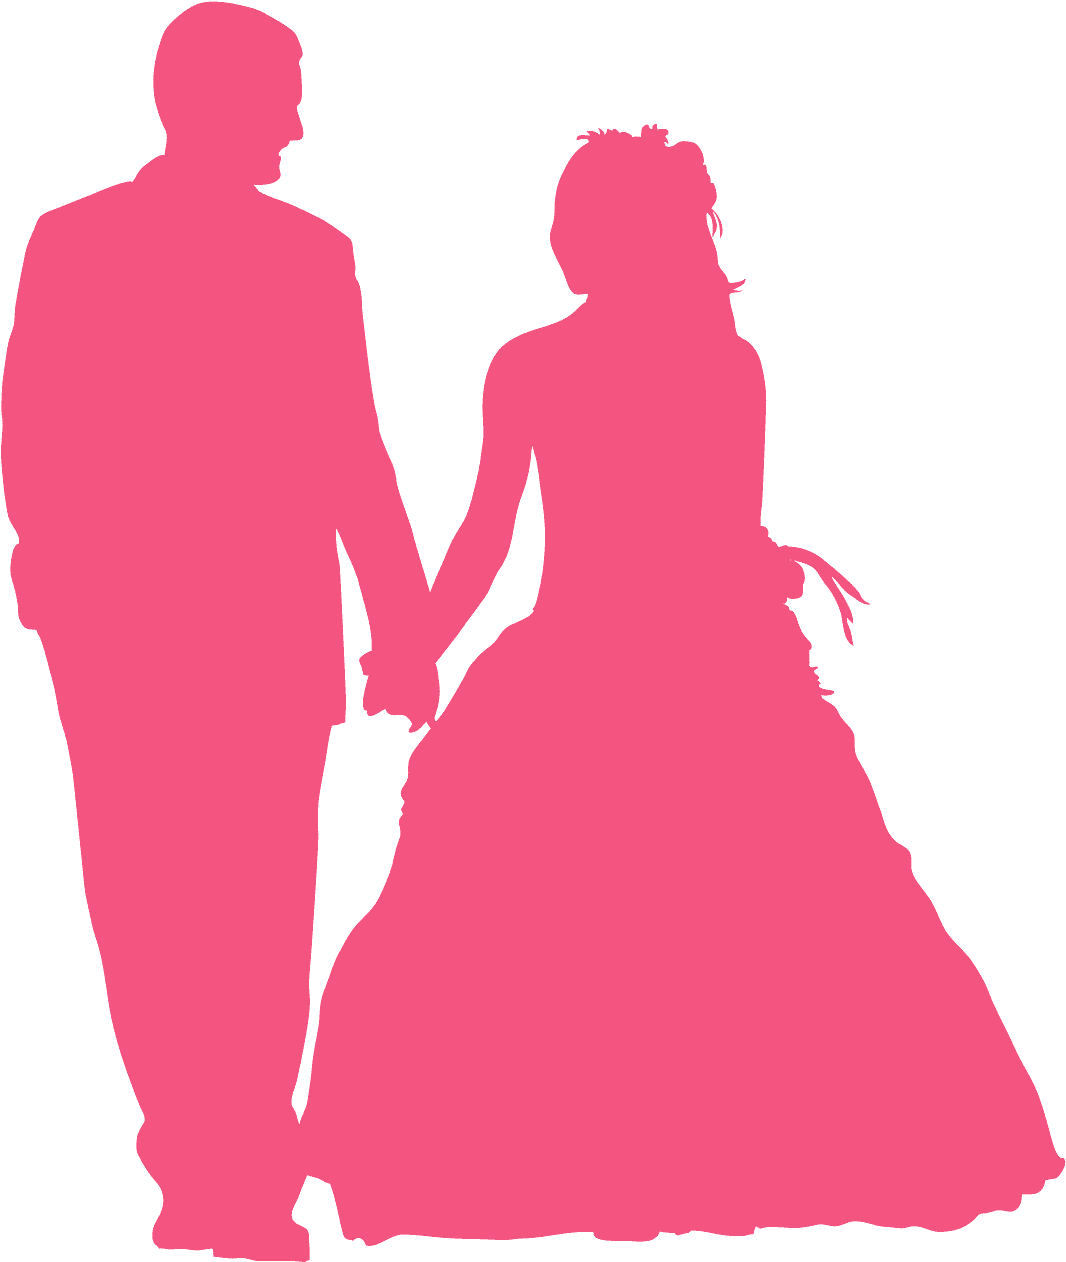 A Silhouette Of A Man And Woman Holding Hands